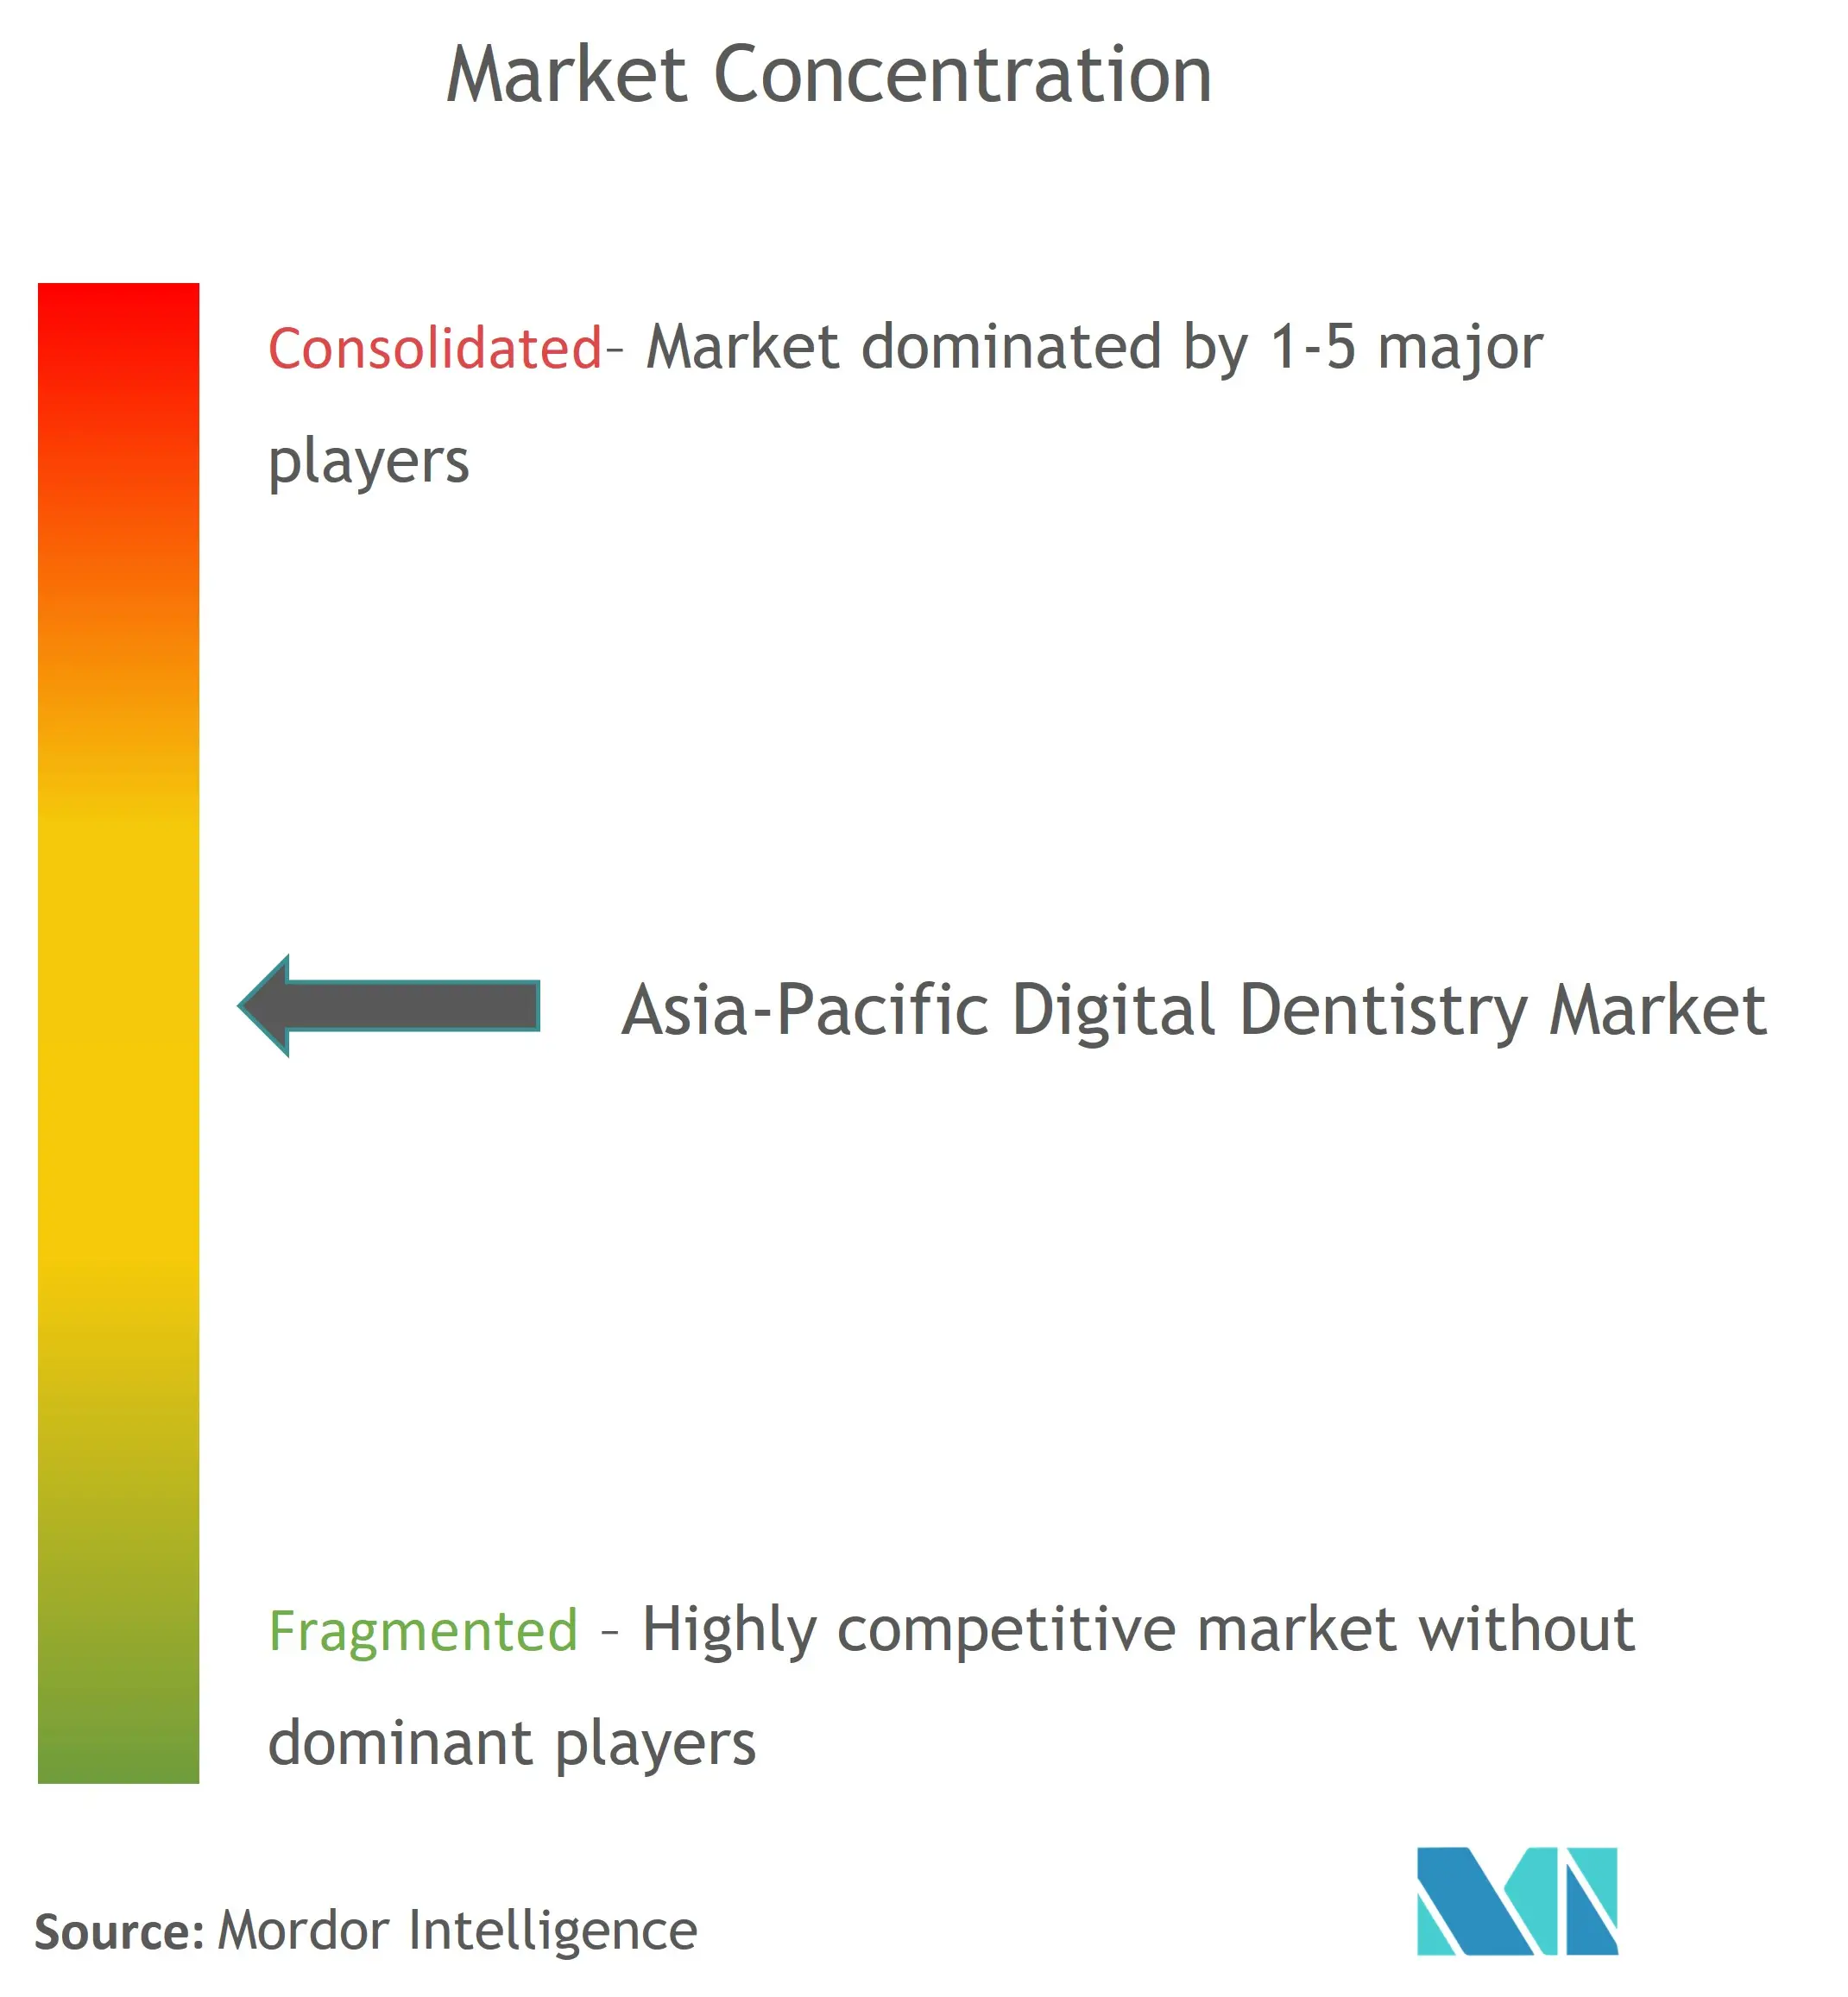 Asia-Pacific Digital Dentistry Market Concentration